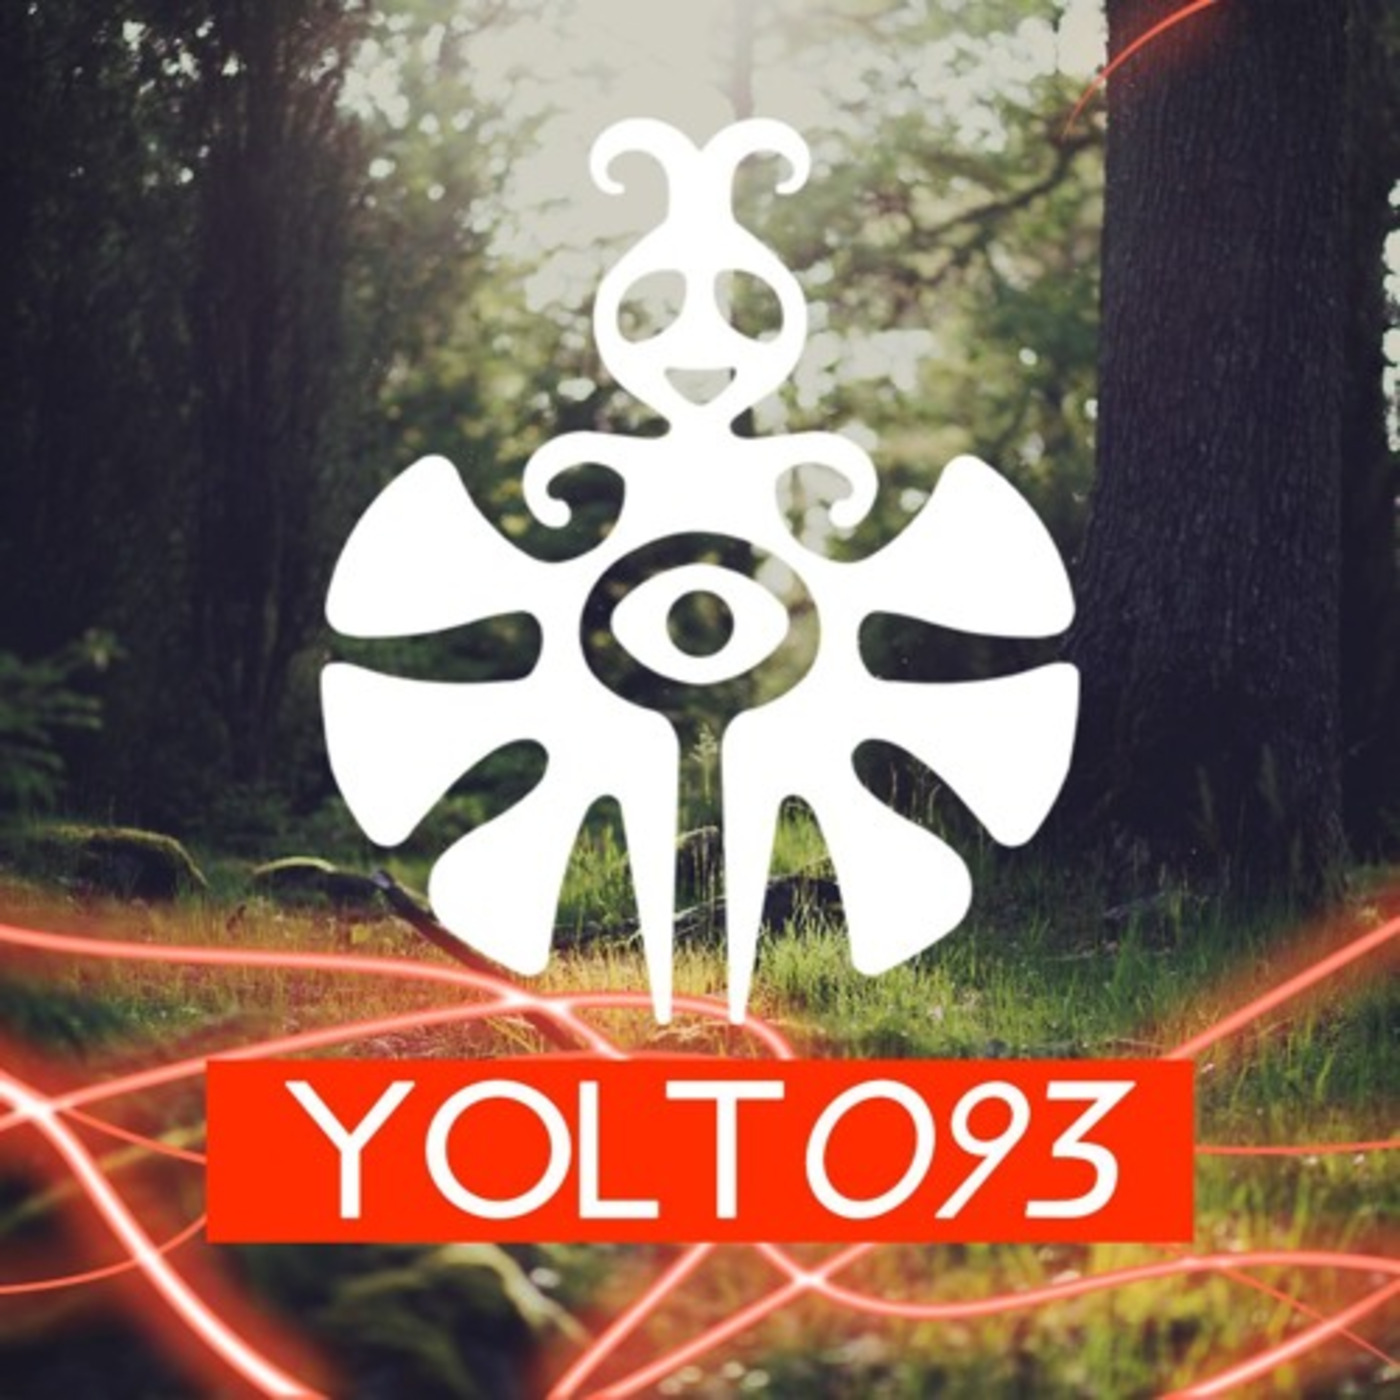 You Only Live Trance Episode 093 (#YOLT093) - Ness